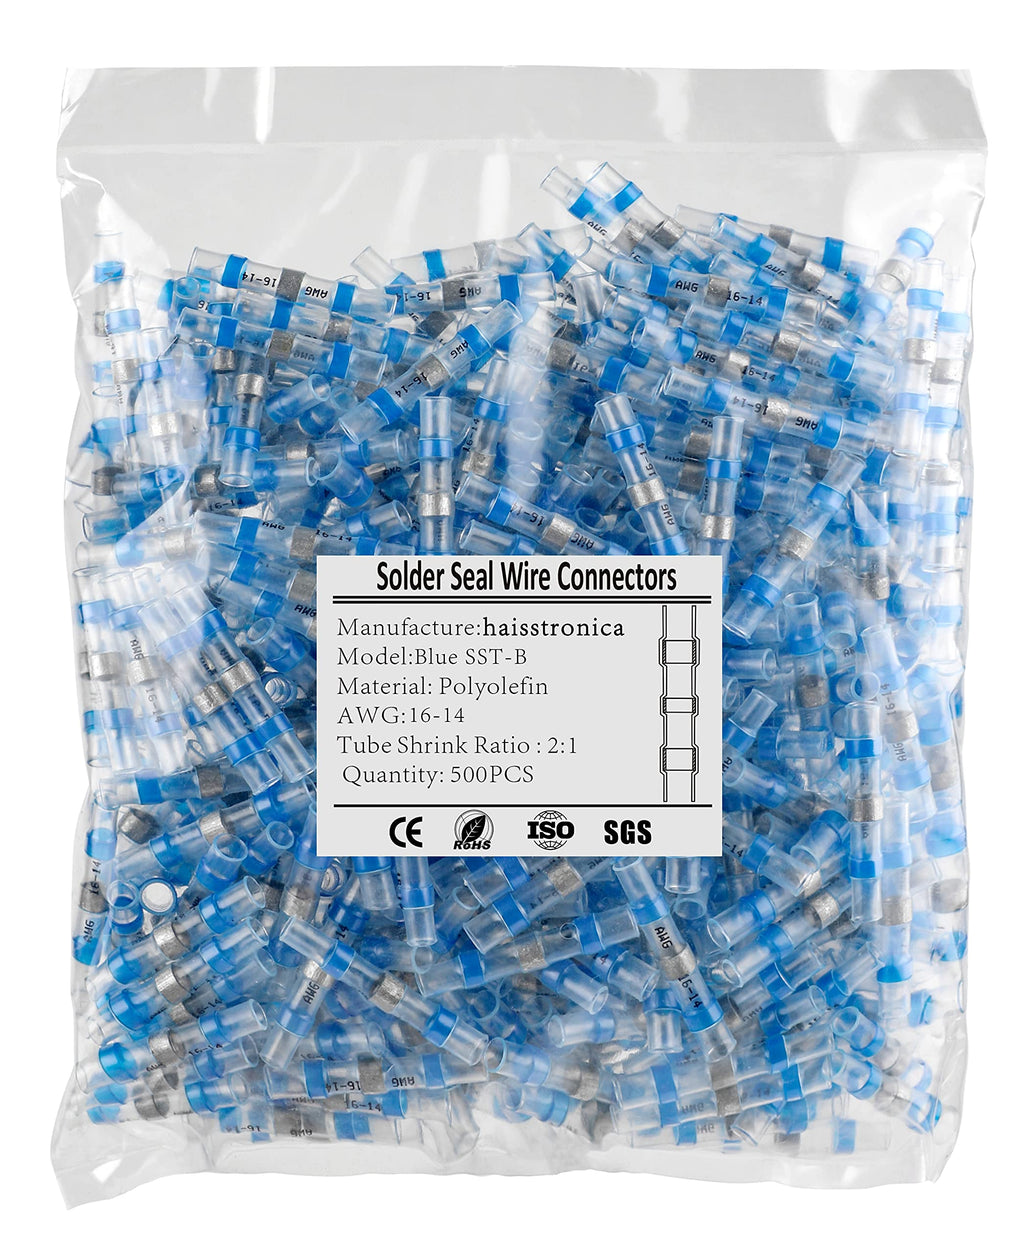 500PCS Blue Solder Seal Wire Connectors AWG16-14,haisstronica Marine Grade Waterproof Solder Wire Connectors,Heat Shrink Butt Connectors,Insulated Butt Splice Electrical Connectors AWG 16-14 Blue 500